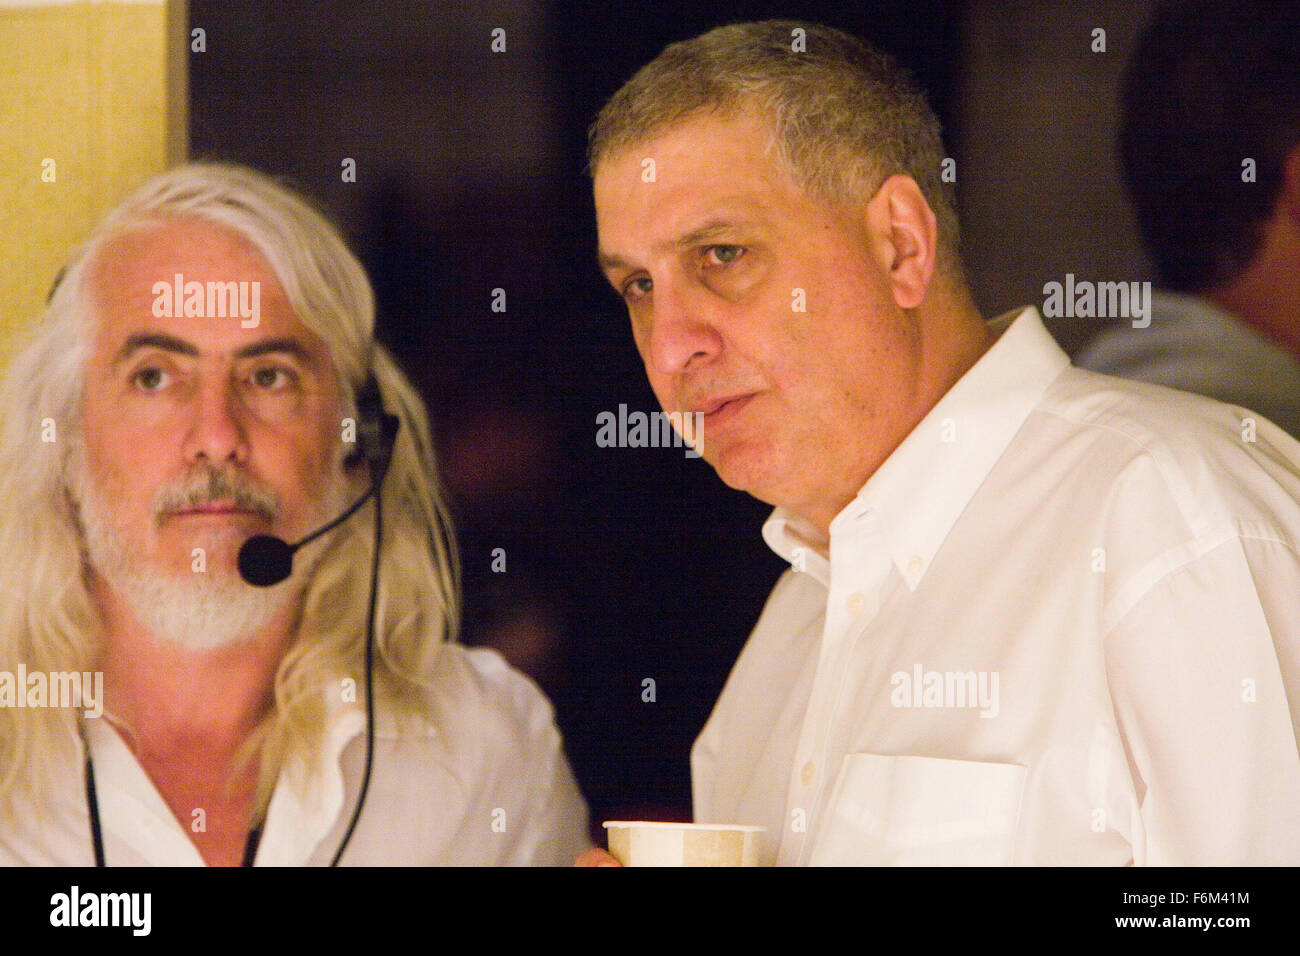 RELEASE DATE: Feb 12, 2008. MOVIE TITLE: Standard Operating Procedure. STUDIO: Sony Pictures Classics. PLOT: Errol Morris examines the incidents of abuse and torture of suspected terrorists at the hands of U.S. forces at the Abu Ghraib prison. PICTURED: Cinematographer ROBERT RICHARDSON with Director ERROL MORRIS. Stock Photo